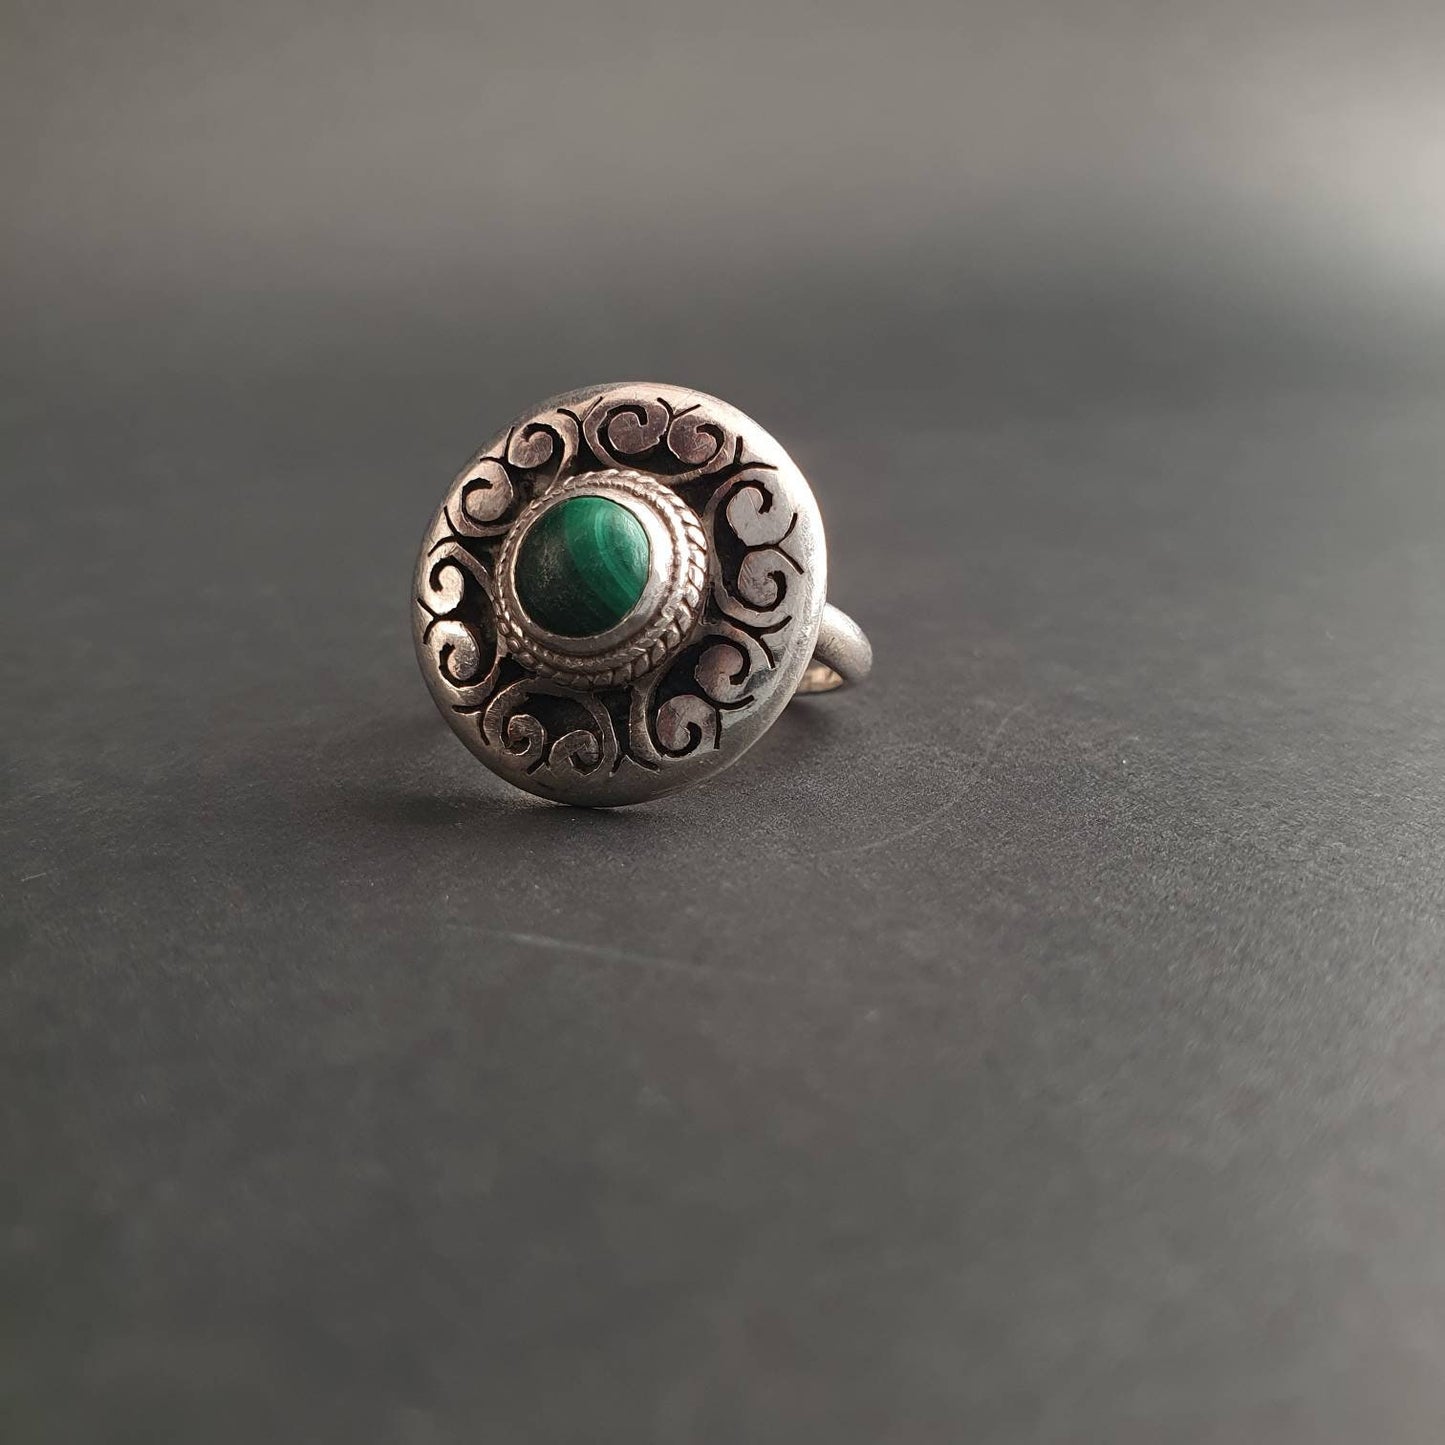 Malachite ring, statement ring,Ethnic ring, Boho Ring, antique victorian sterling silver jewellery, statement ring unisex gifts